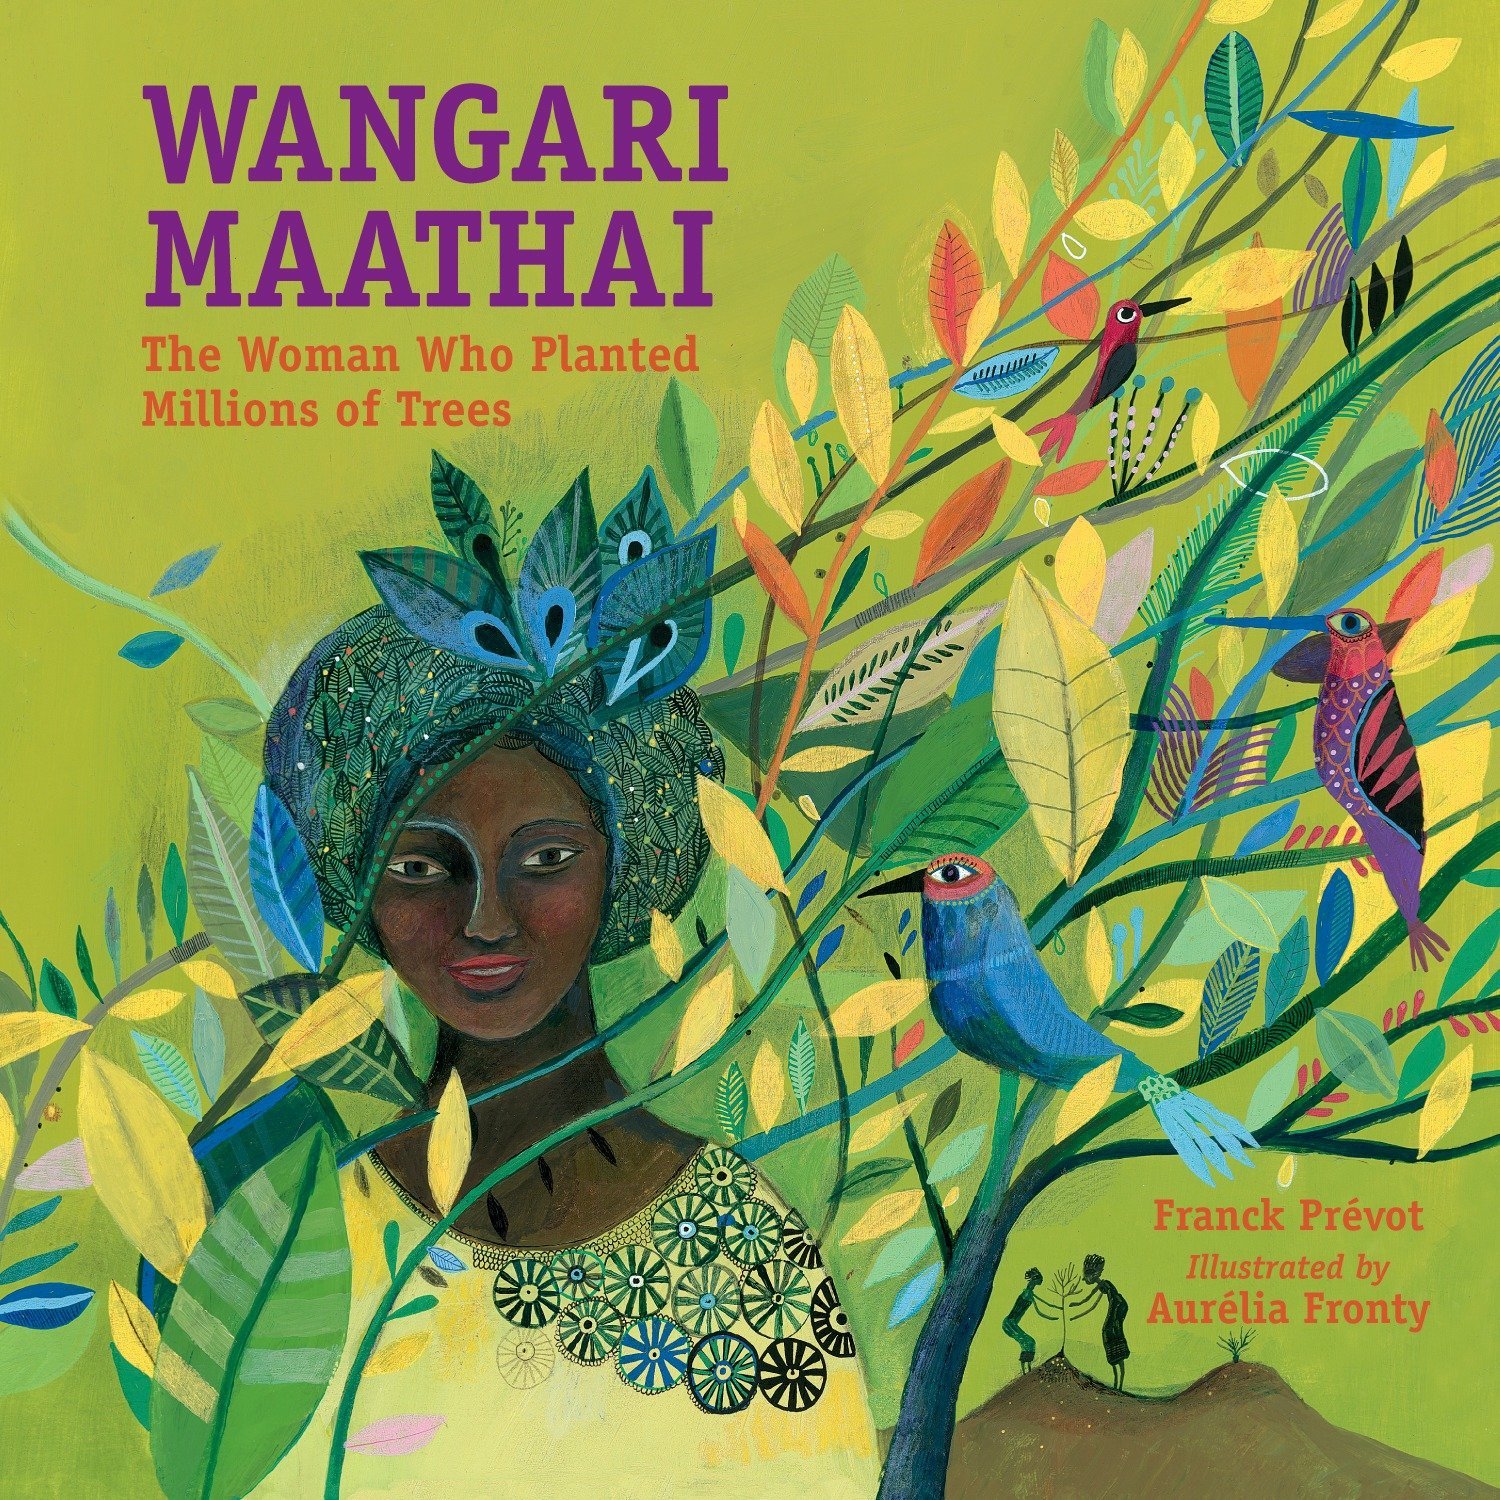 Cover of the book Wangari Maathai: The Woman Who Planted Millions of Trees. Features Wangari accompanied by two birds on a backdrop of leaves and a green cover.